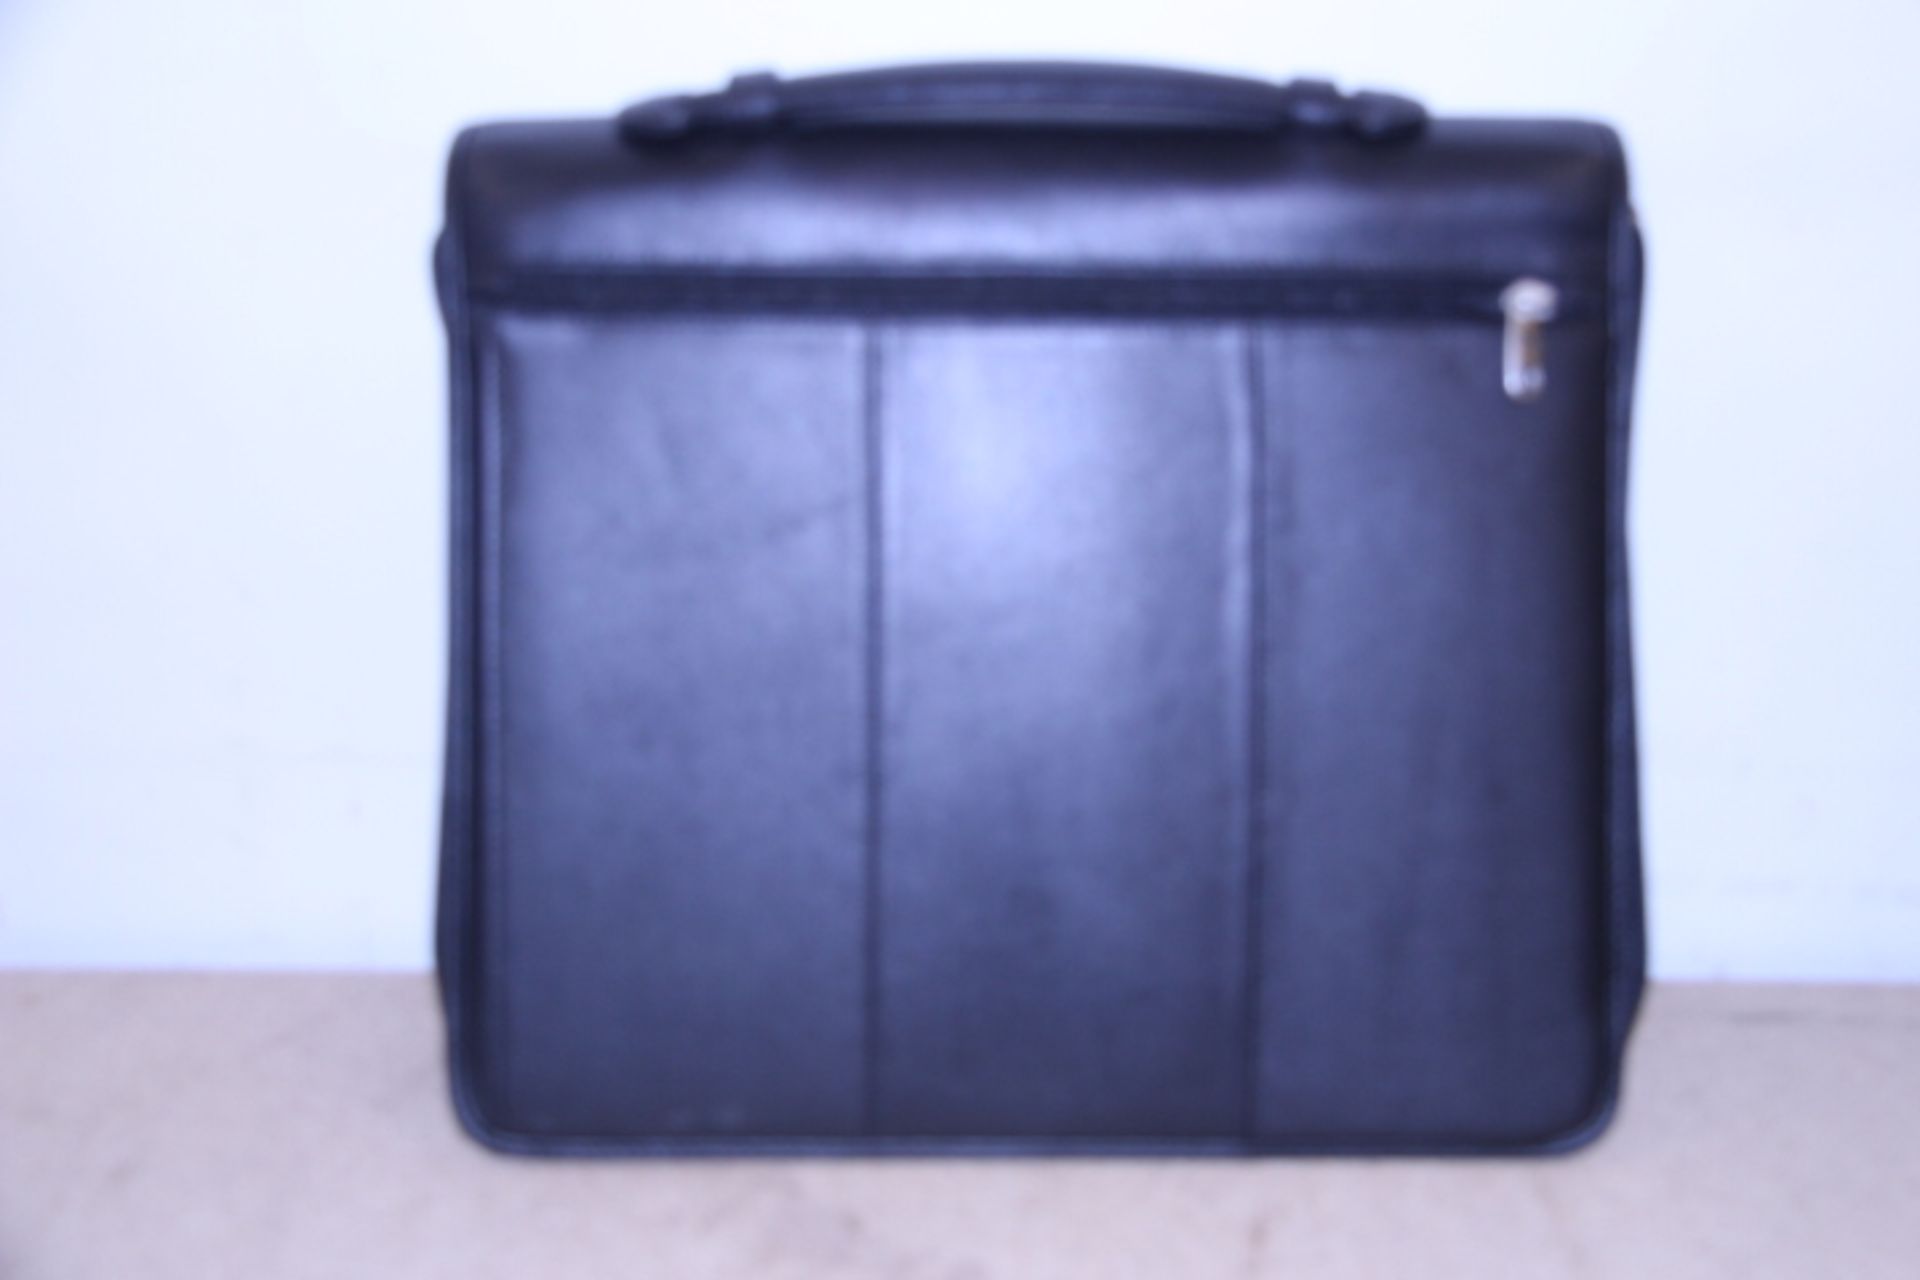 V Brand New Samsonite Black Leather Executive Folder With Carry Handle-Two Inner Pockets-Credit Card - Image 2 of 2